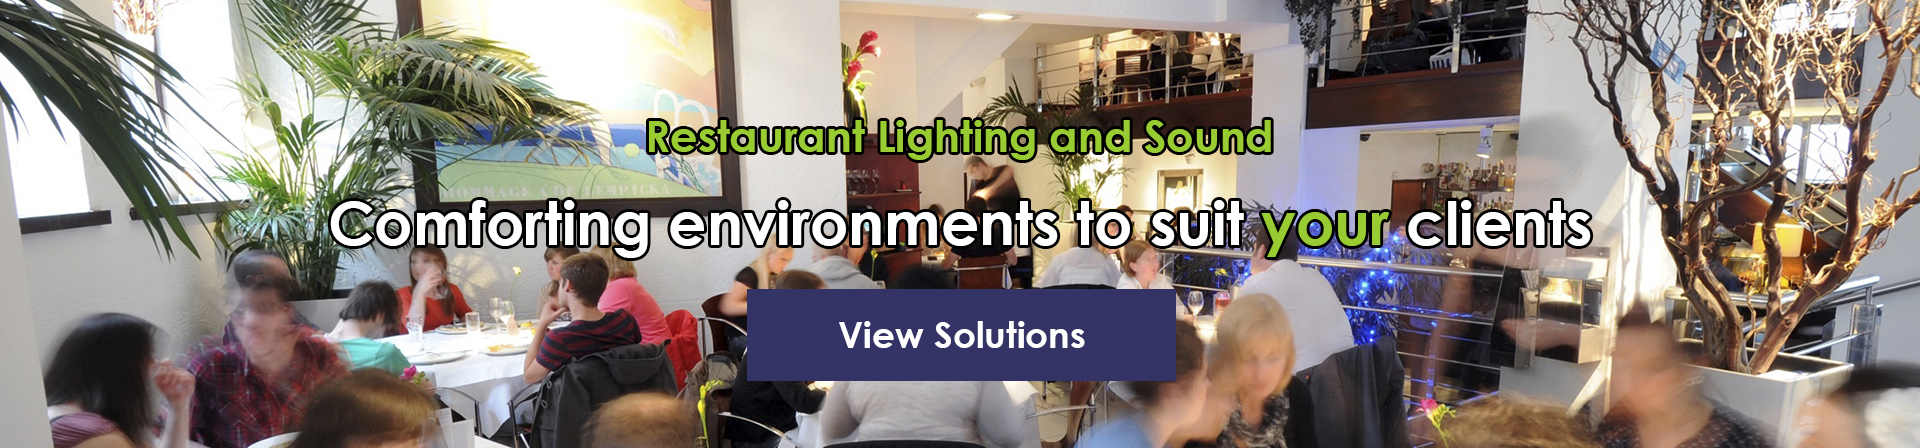 Restaurant and Bar Lighting and Sound Systems and Solutions